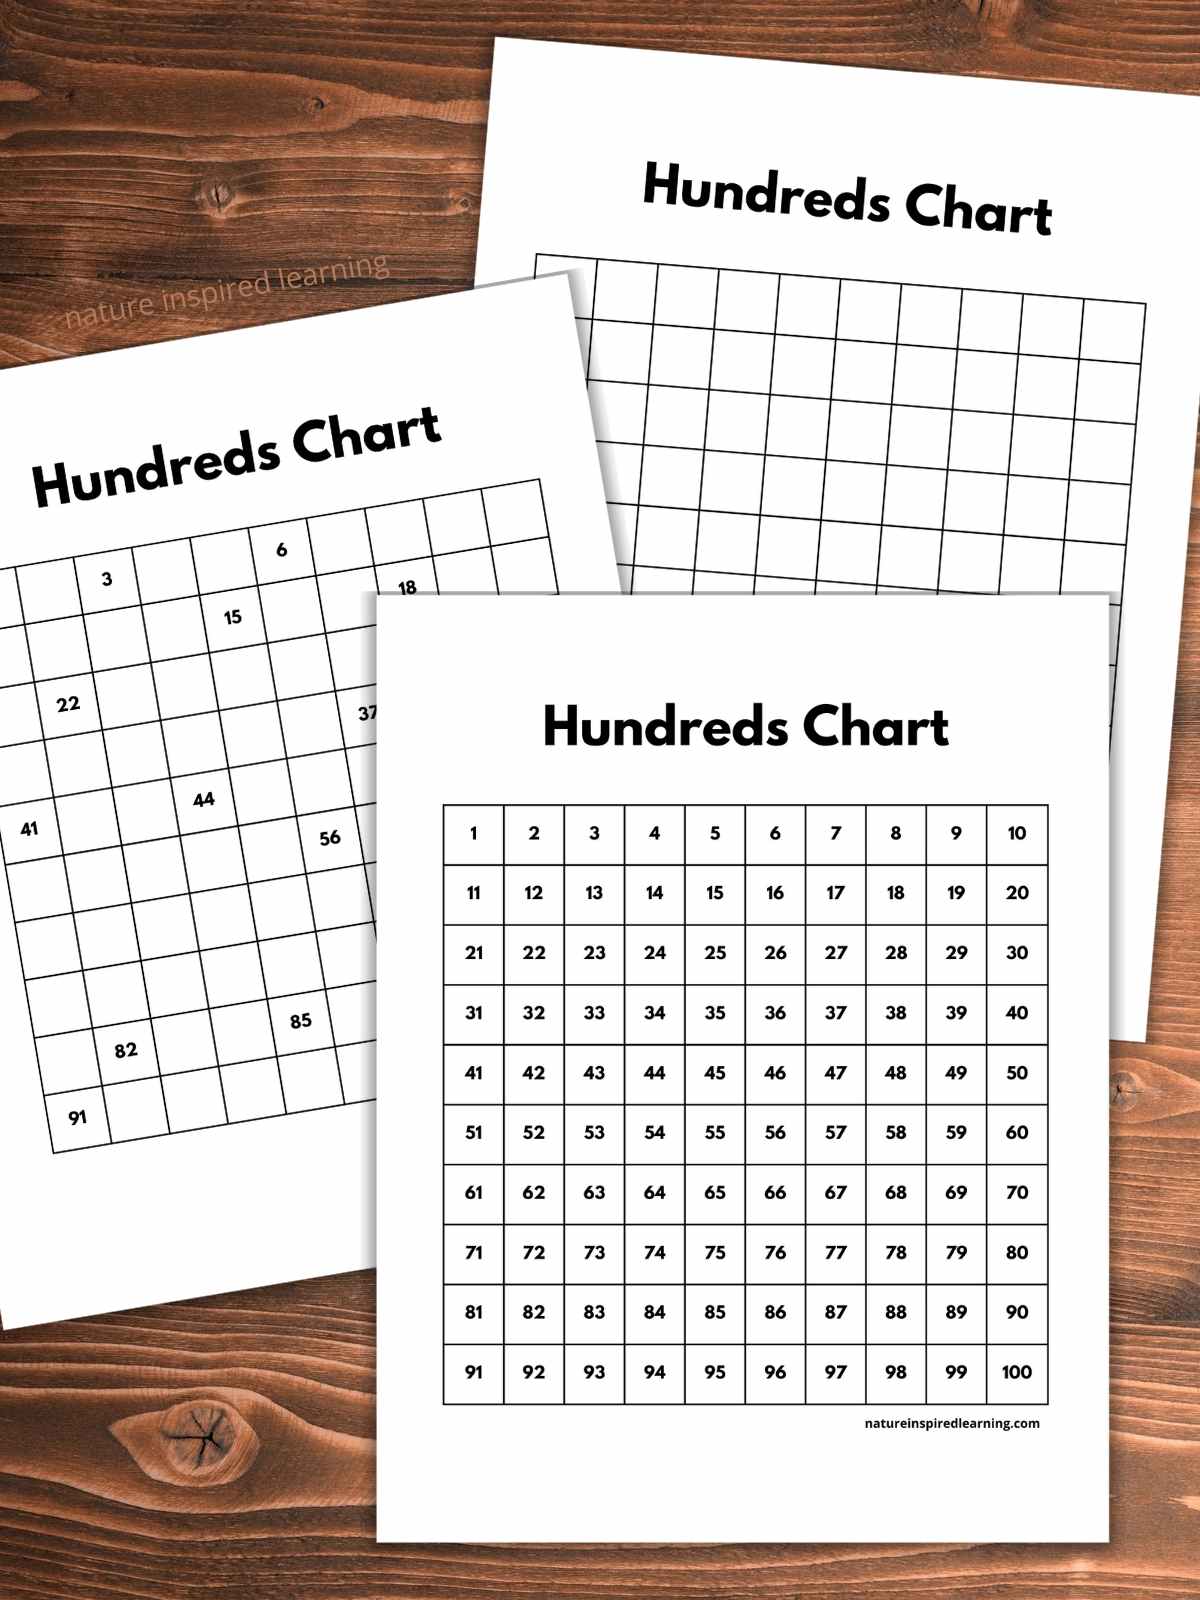 three black and white hundred charts overlapping on a wooden background. One with numbers 1 through 100, another with some numbers with blank squares, and the third with all blank squares.